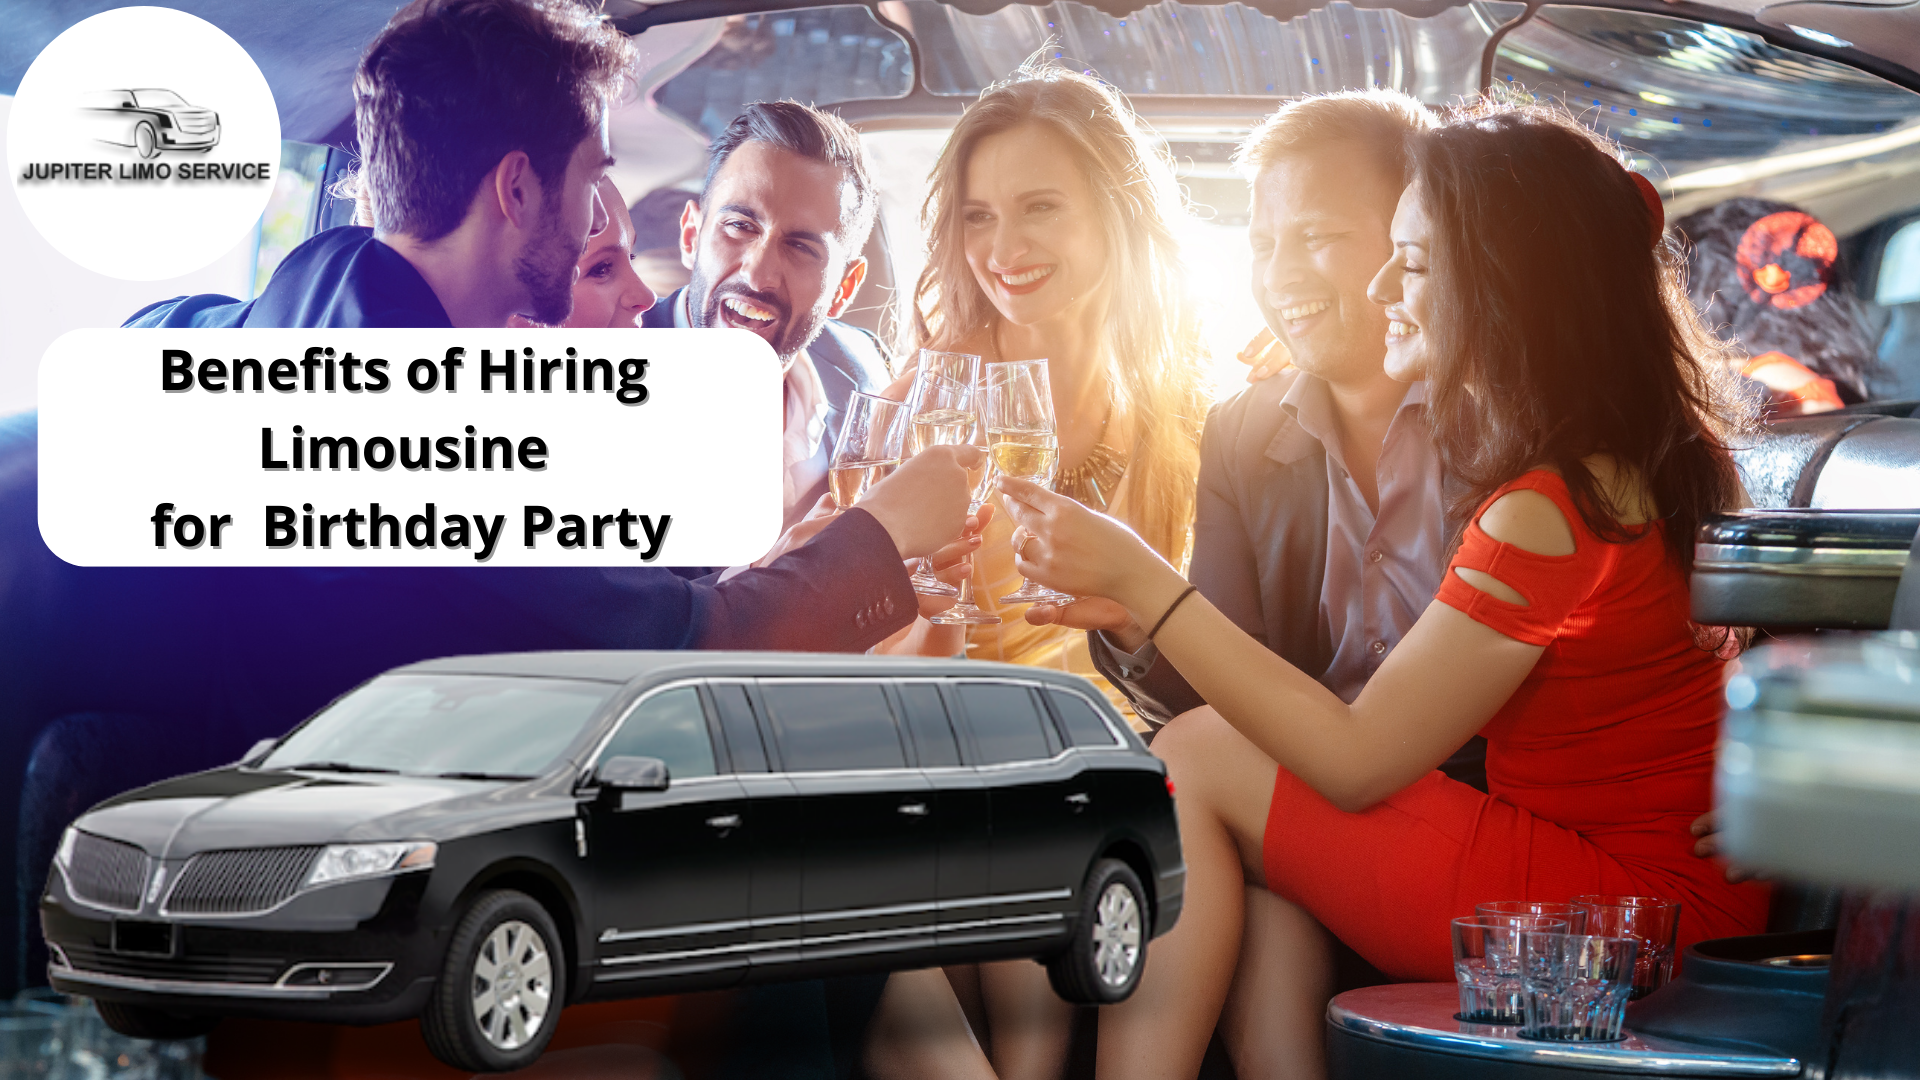 Benefits of hiring limousine for birthday party